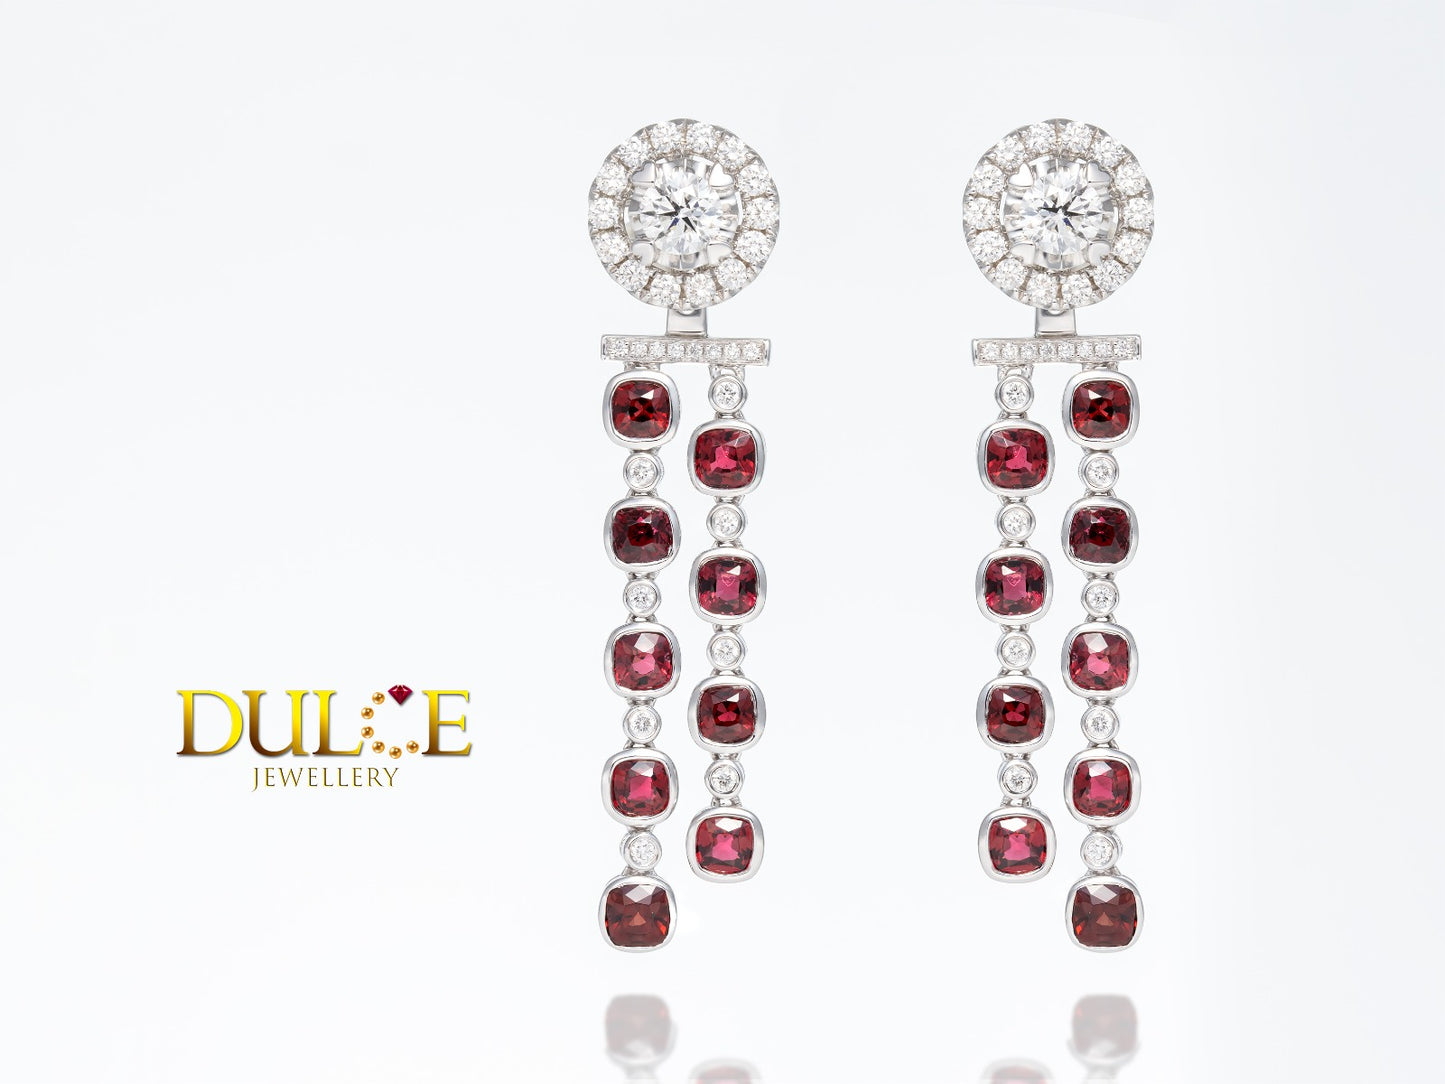 18K Gold Red Spinel Diamond Jackets (Diamond Earrings not included)(GERSPINEL2397)